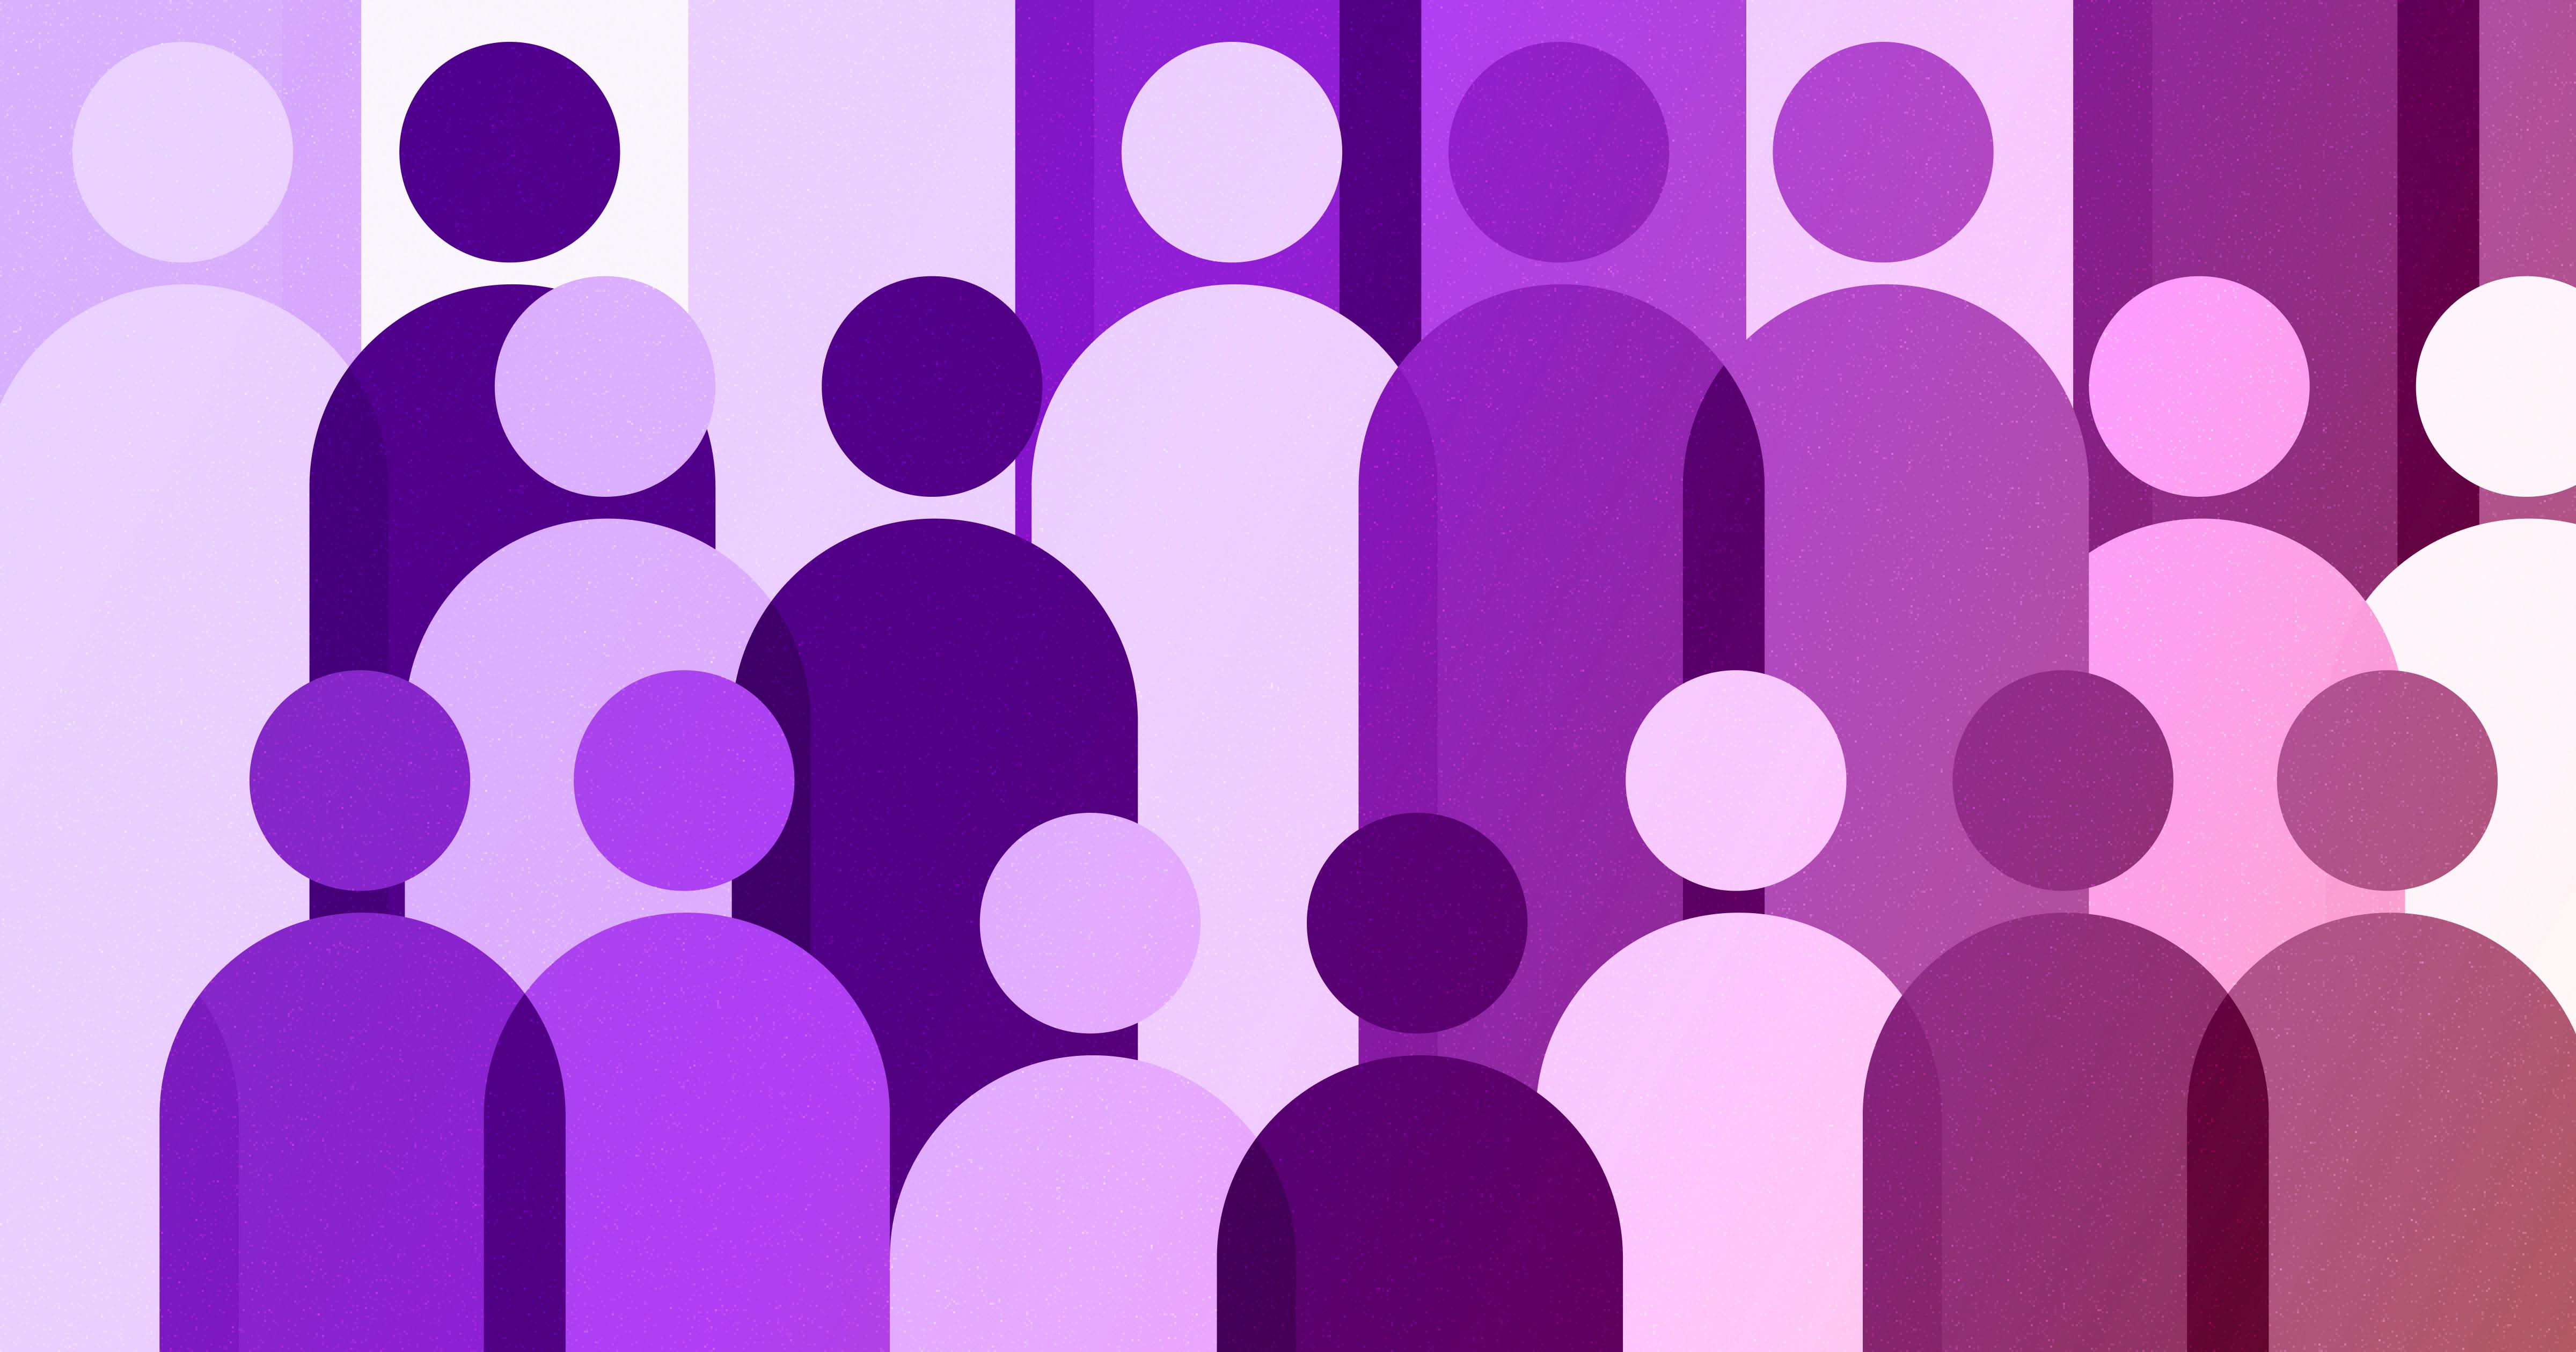 Silhouettes of people in varying shades of purple.